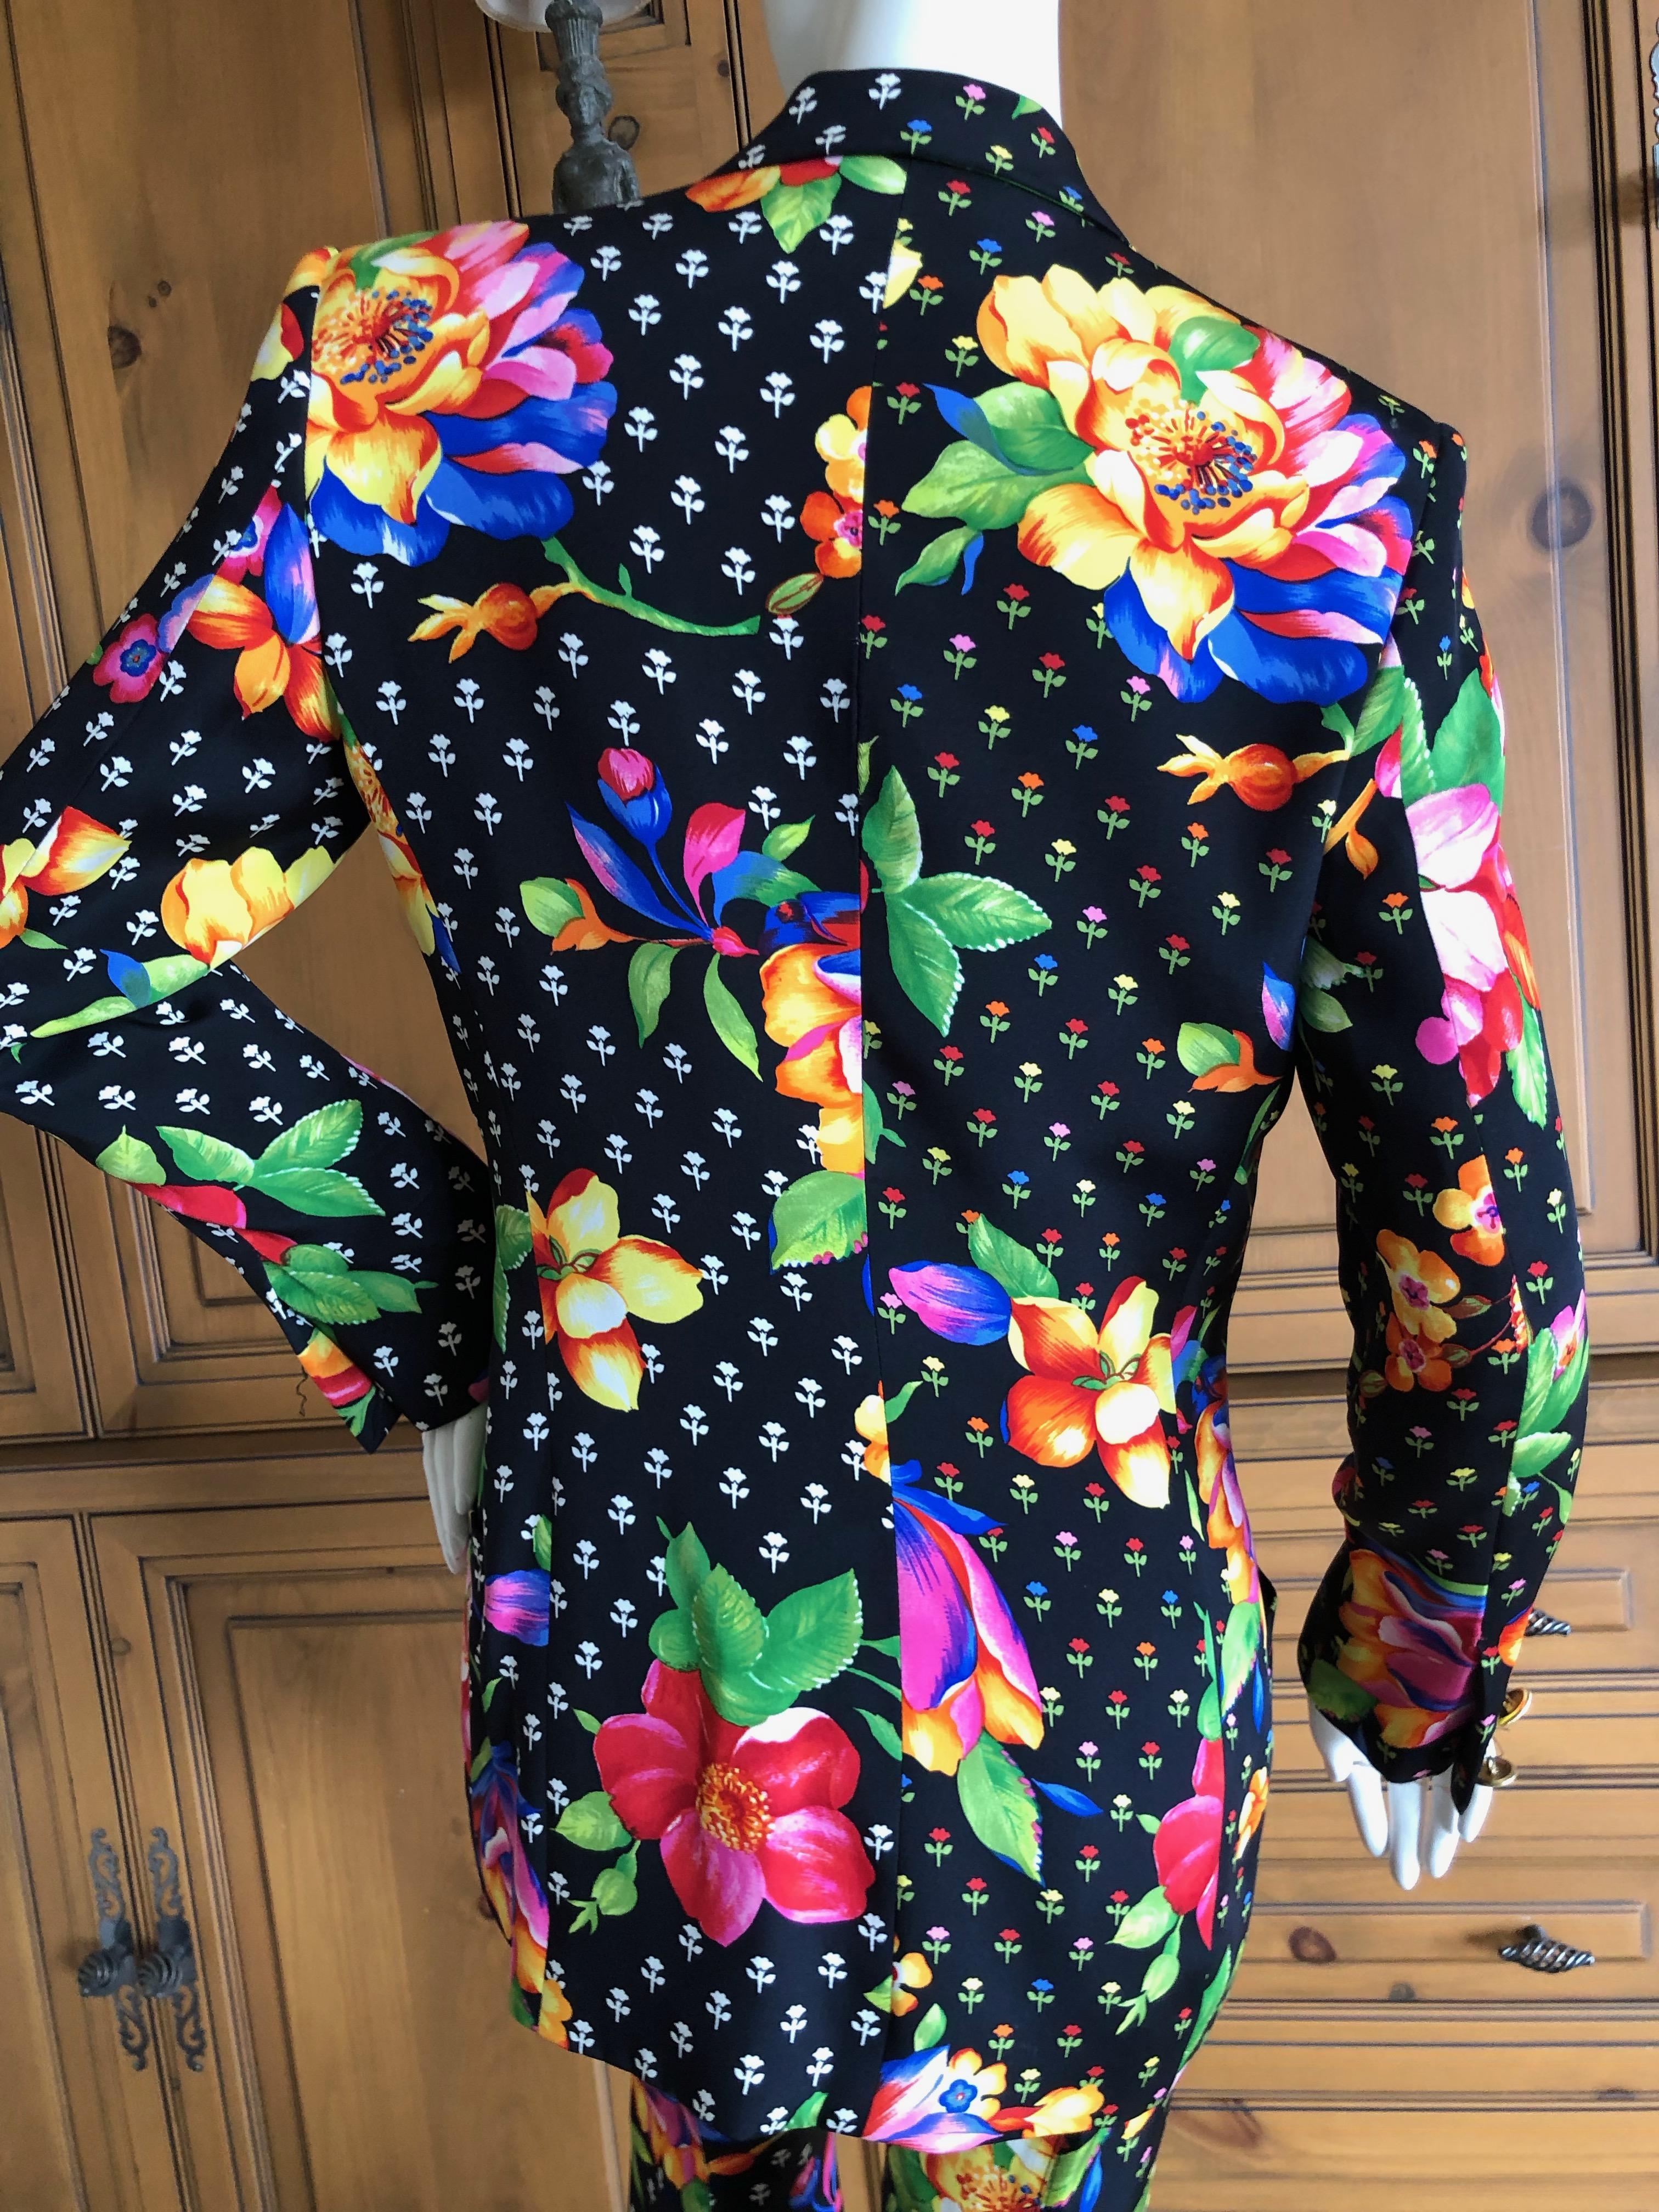 Gianni Versace Couture Fall 1992 Silk Floral Bell Bottom Pant Suit For Sale 4